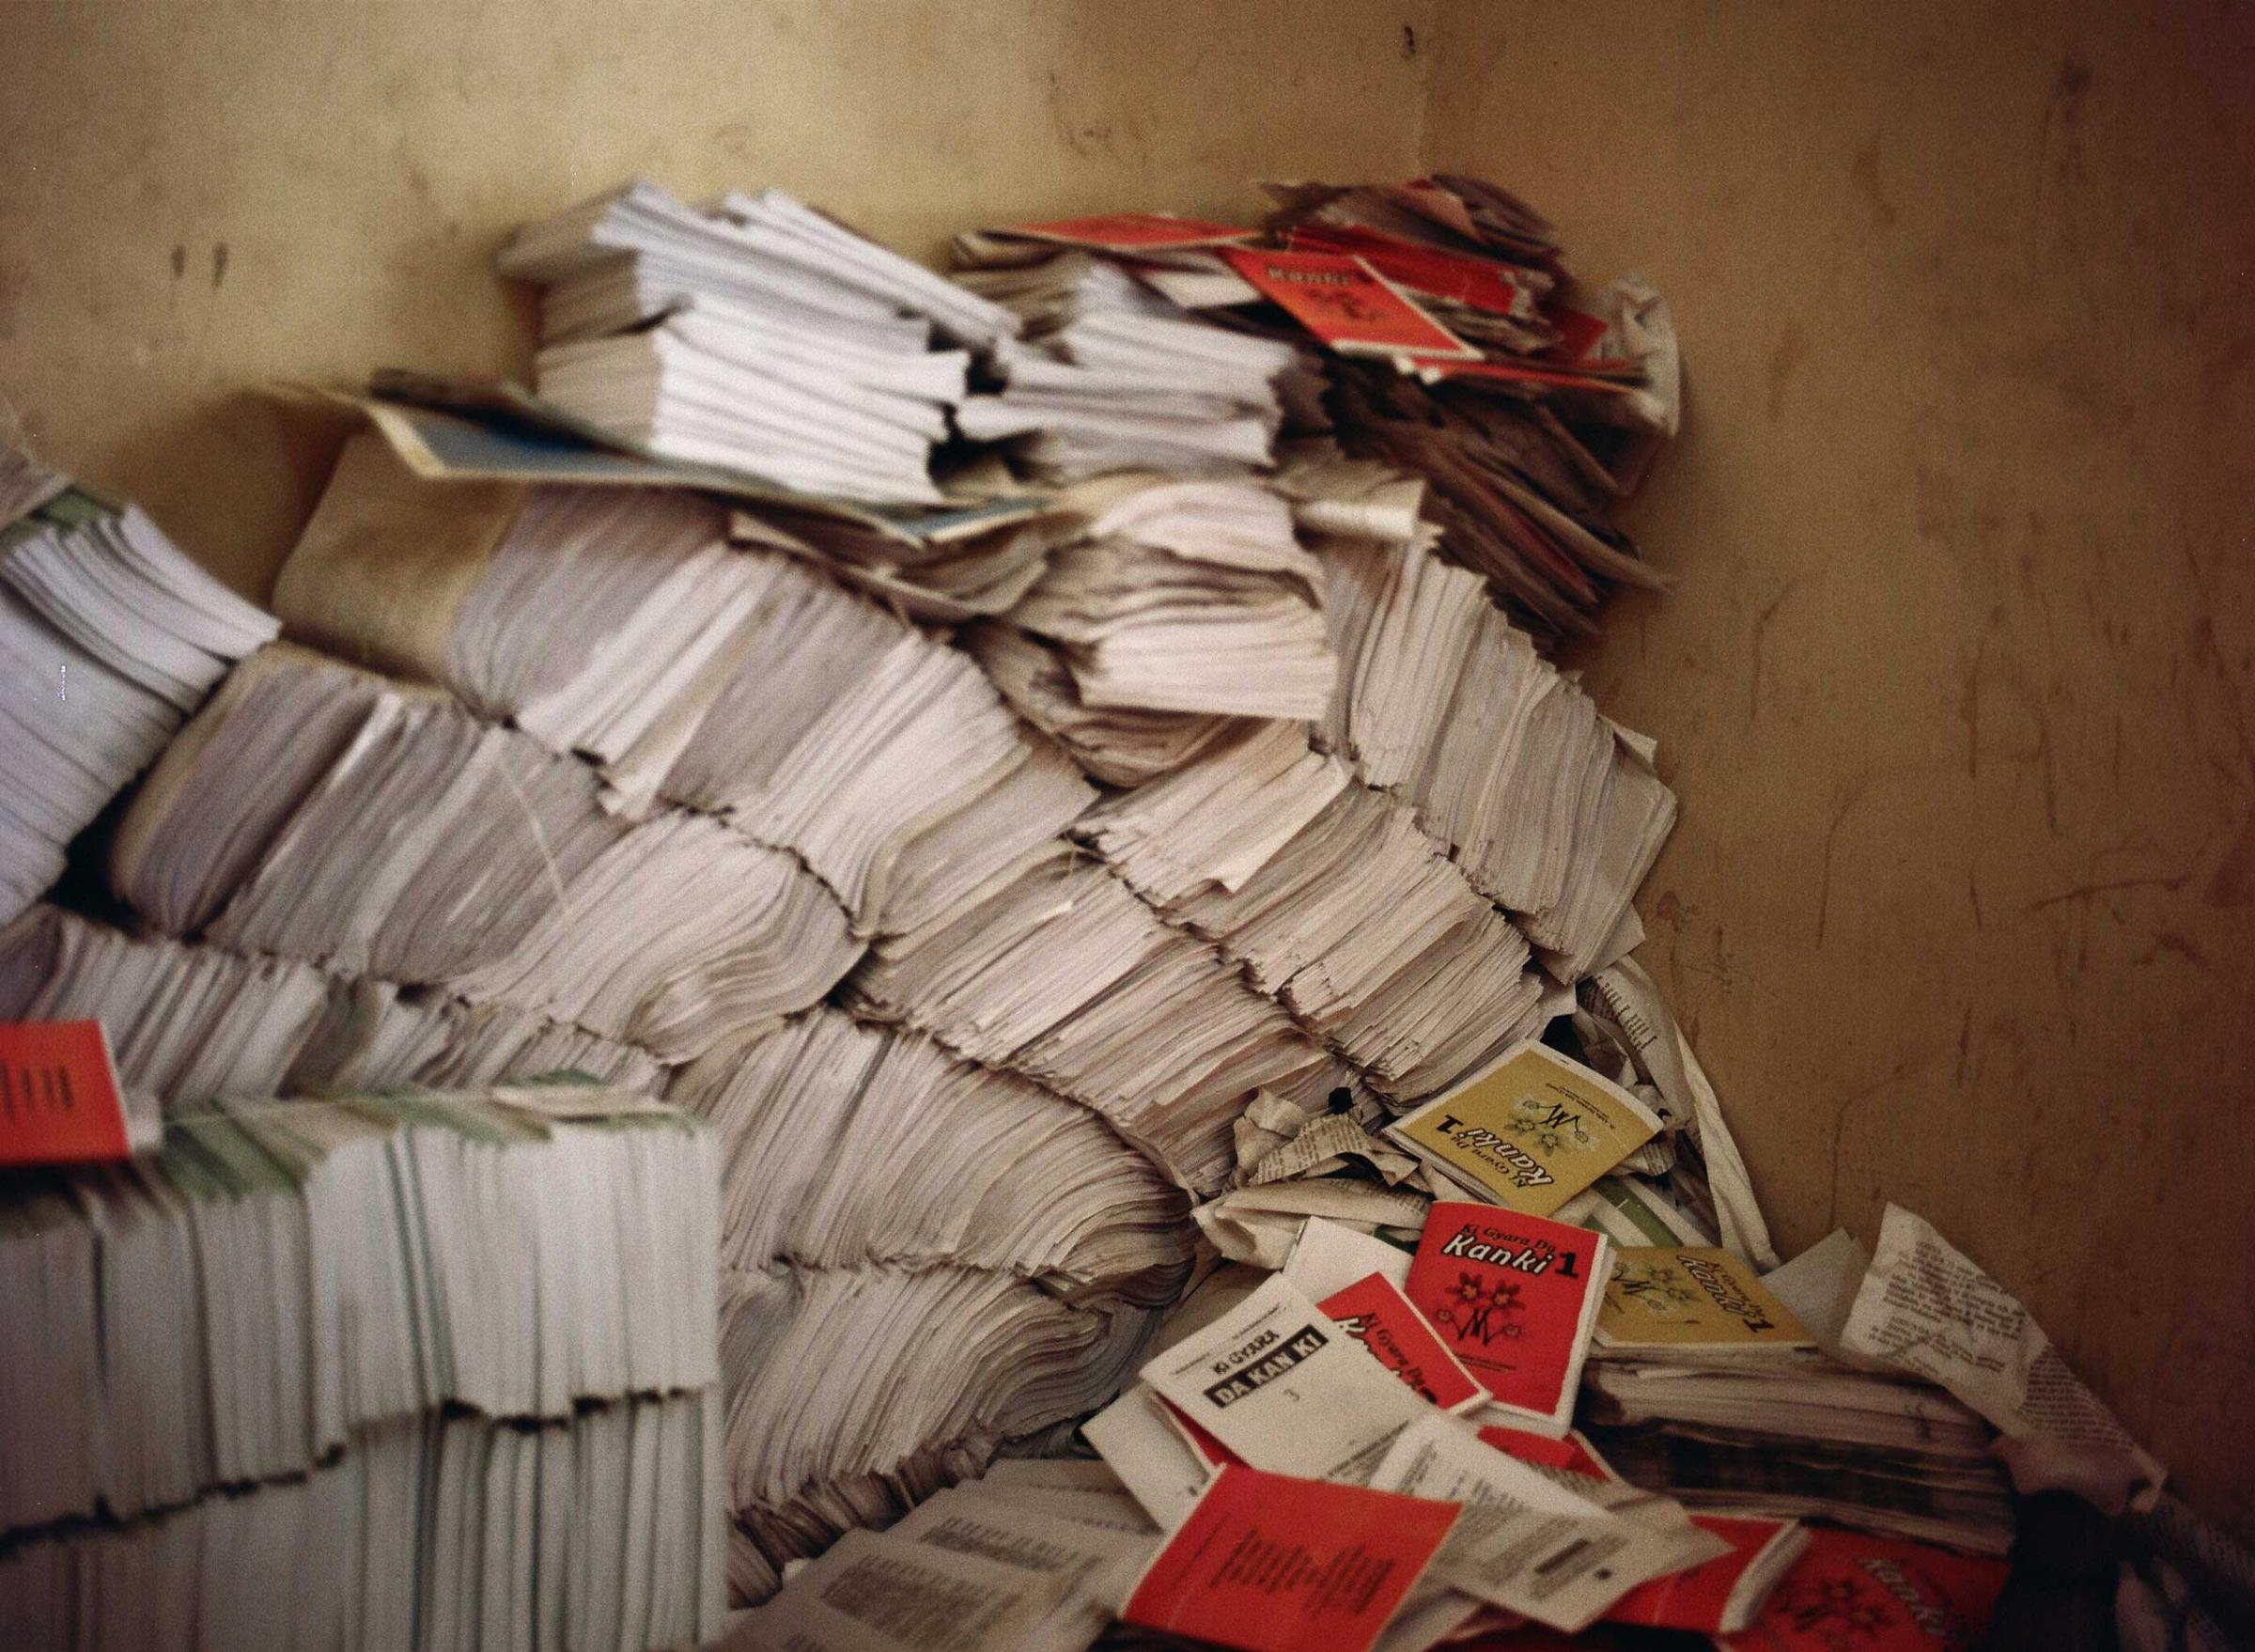 Piles of books are stacked up before they are taken to the market to be sold, Kano, Northern Nigeria. April 8, 2013.